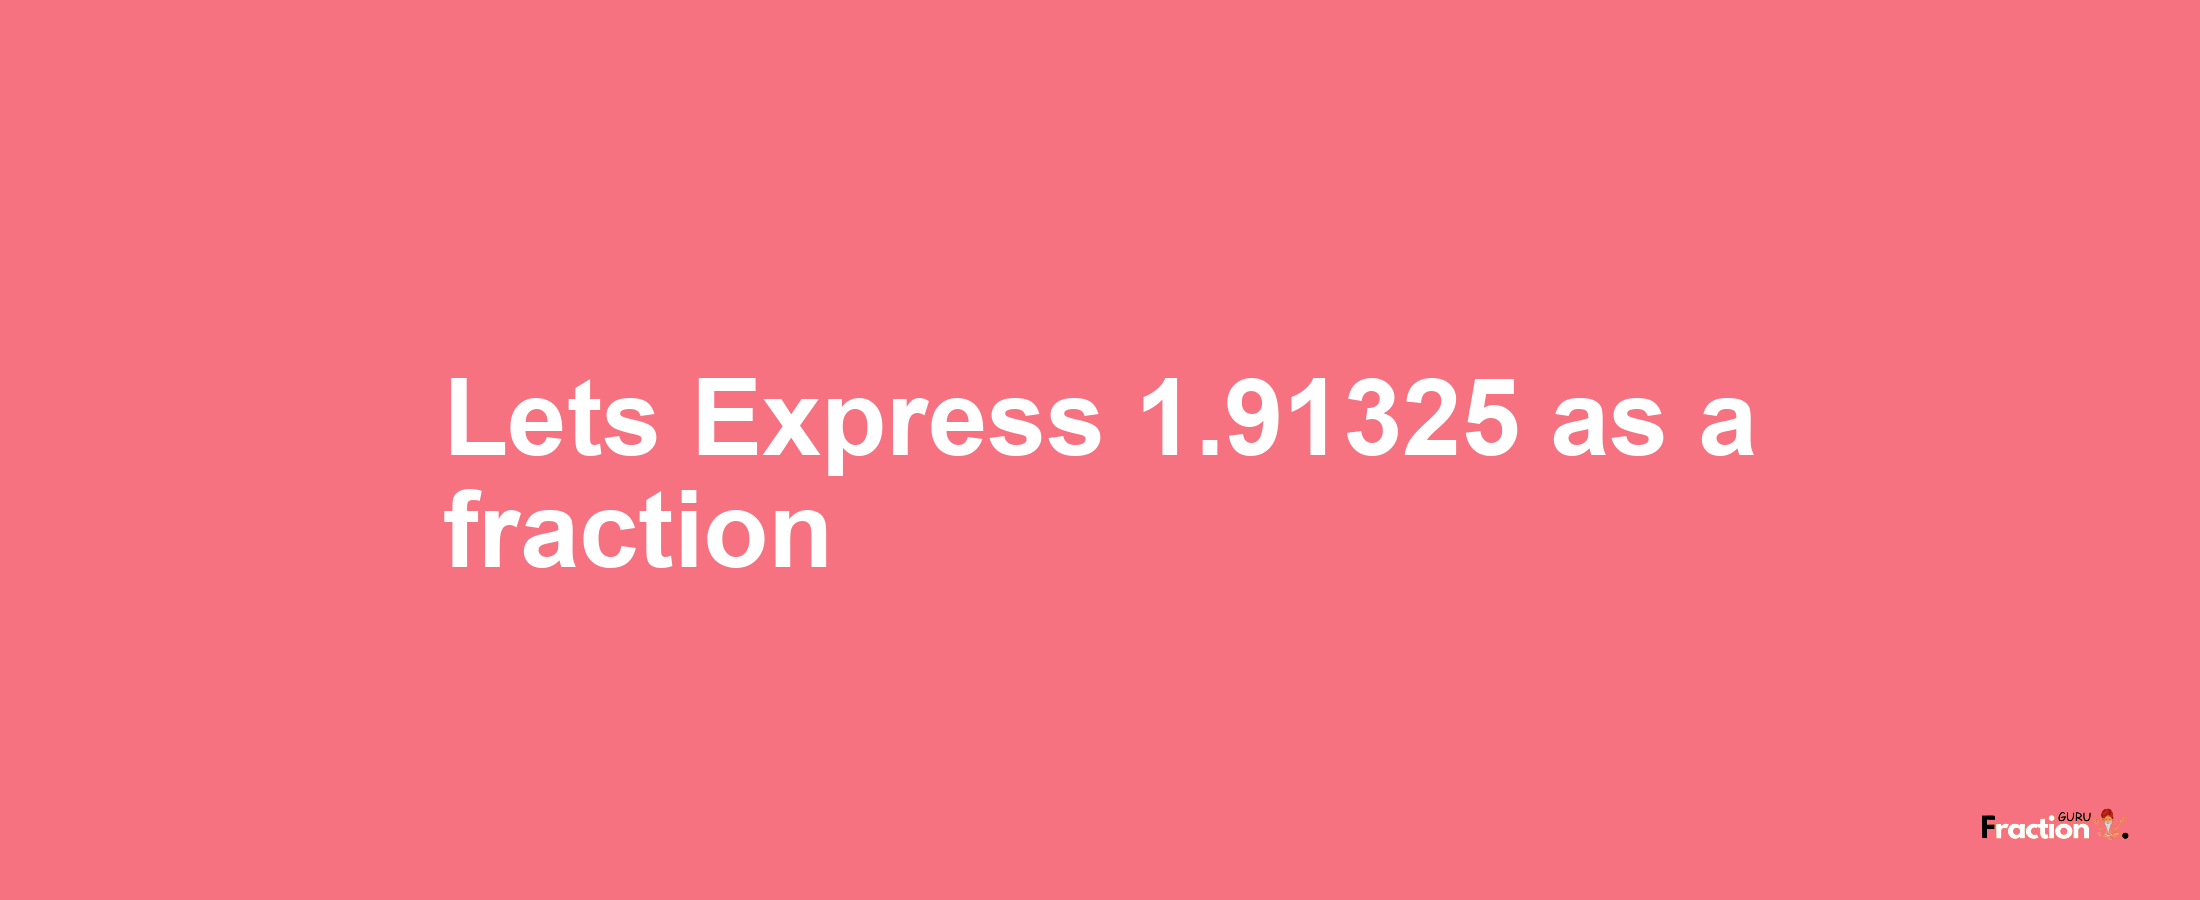 Lets Express 1.91325 as afraction